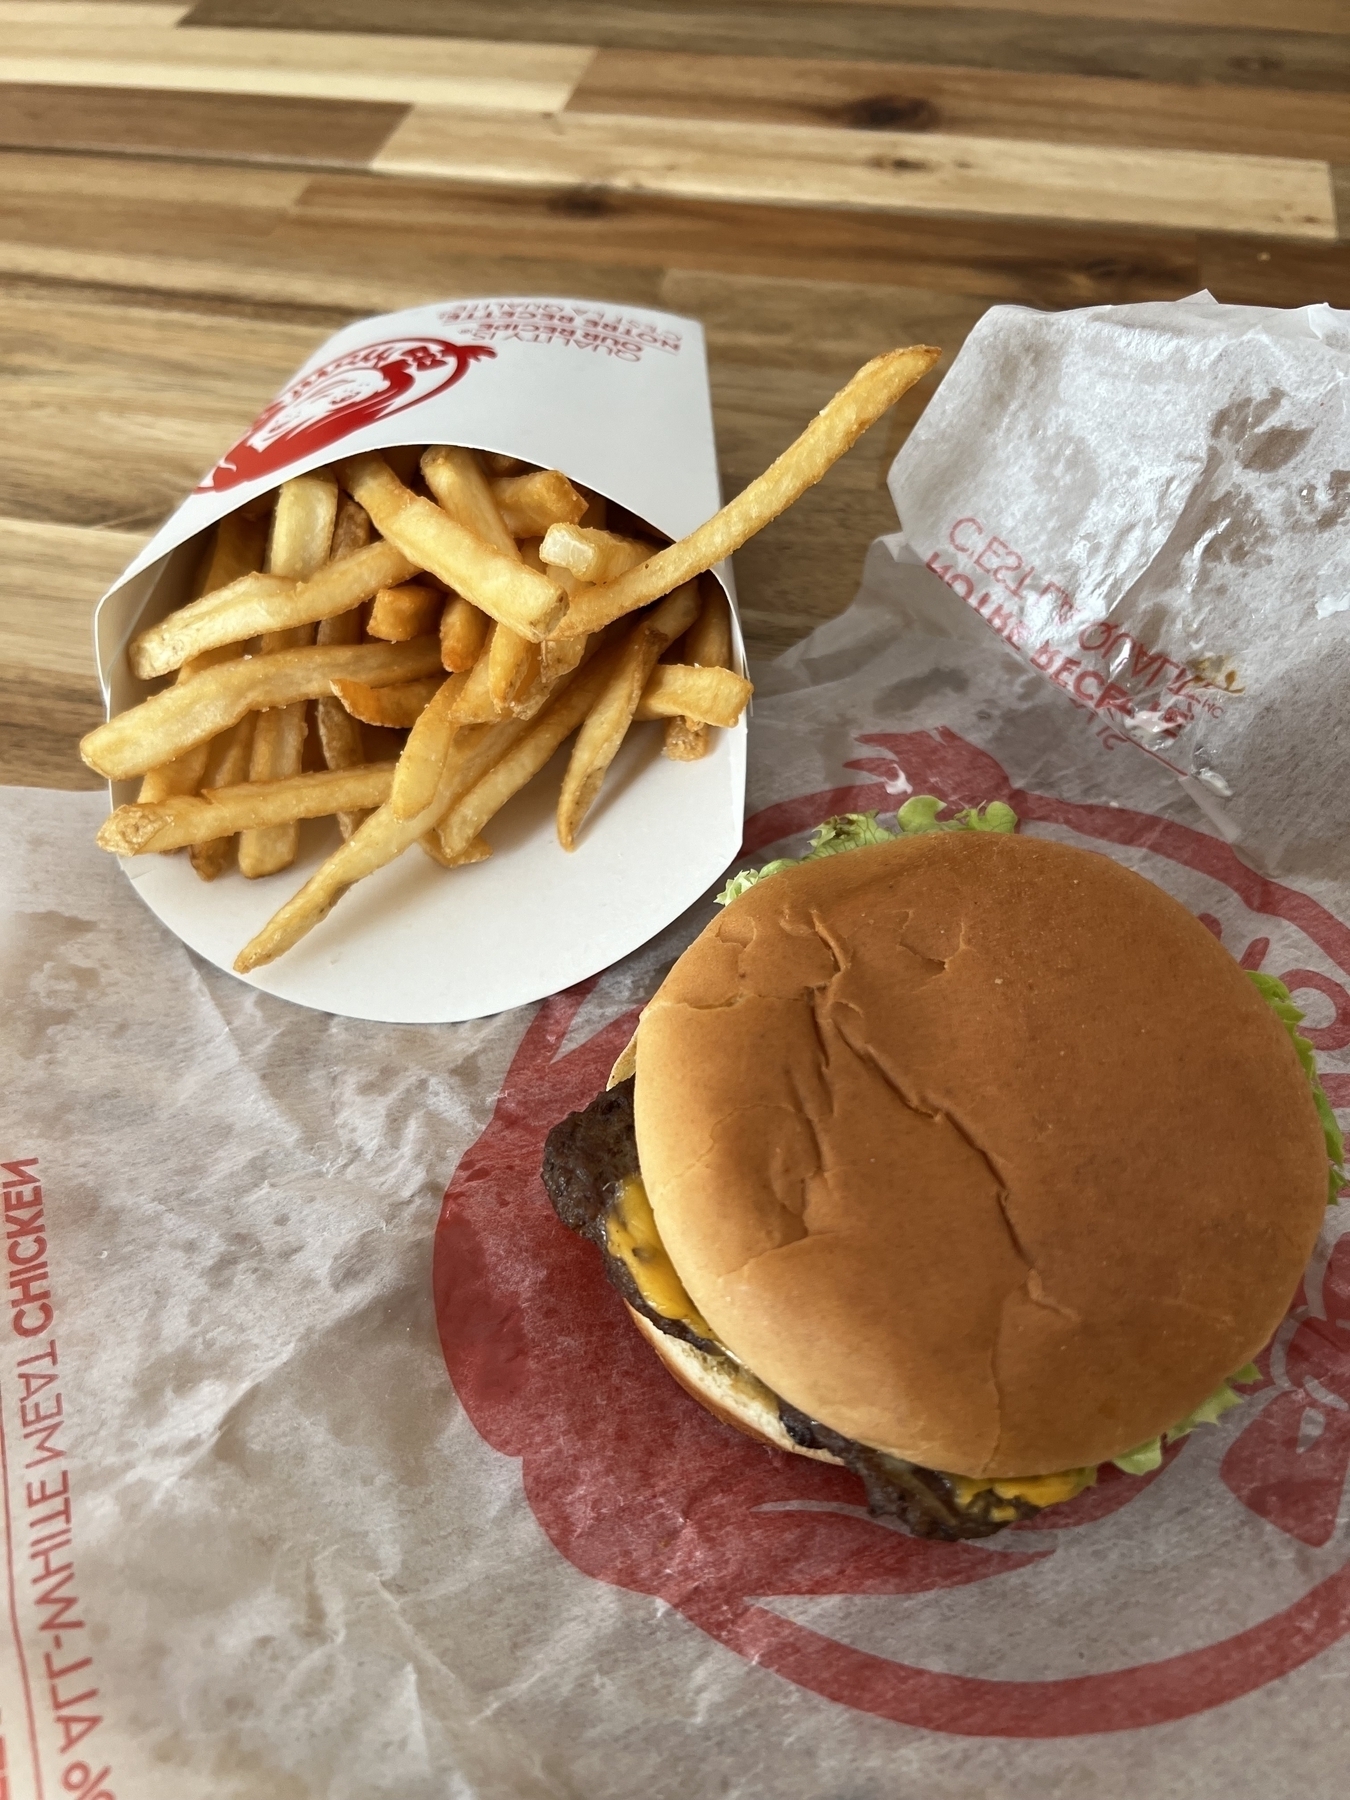 A Wendy’s burger and fries